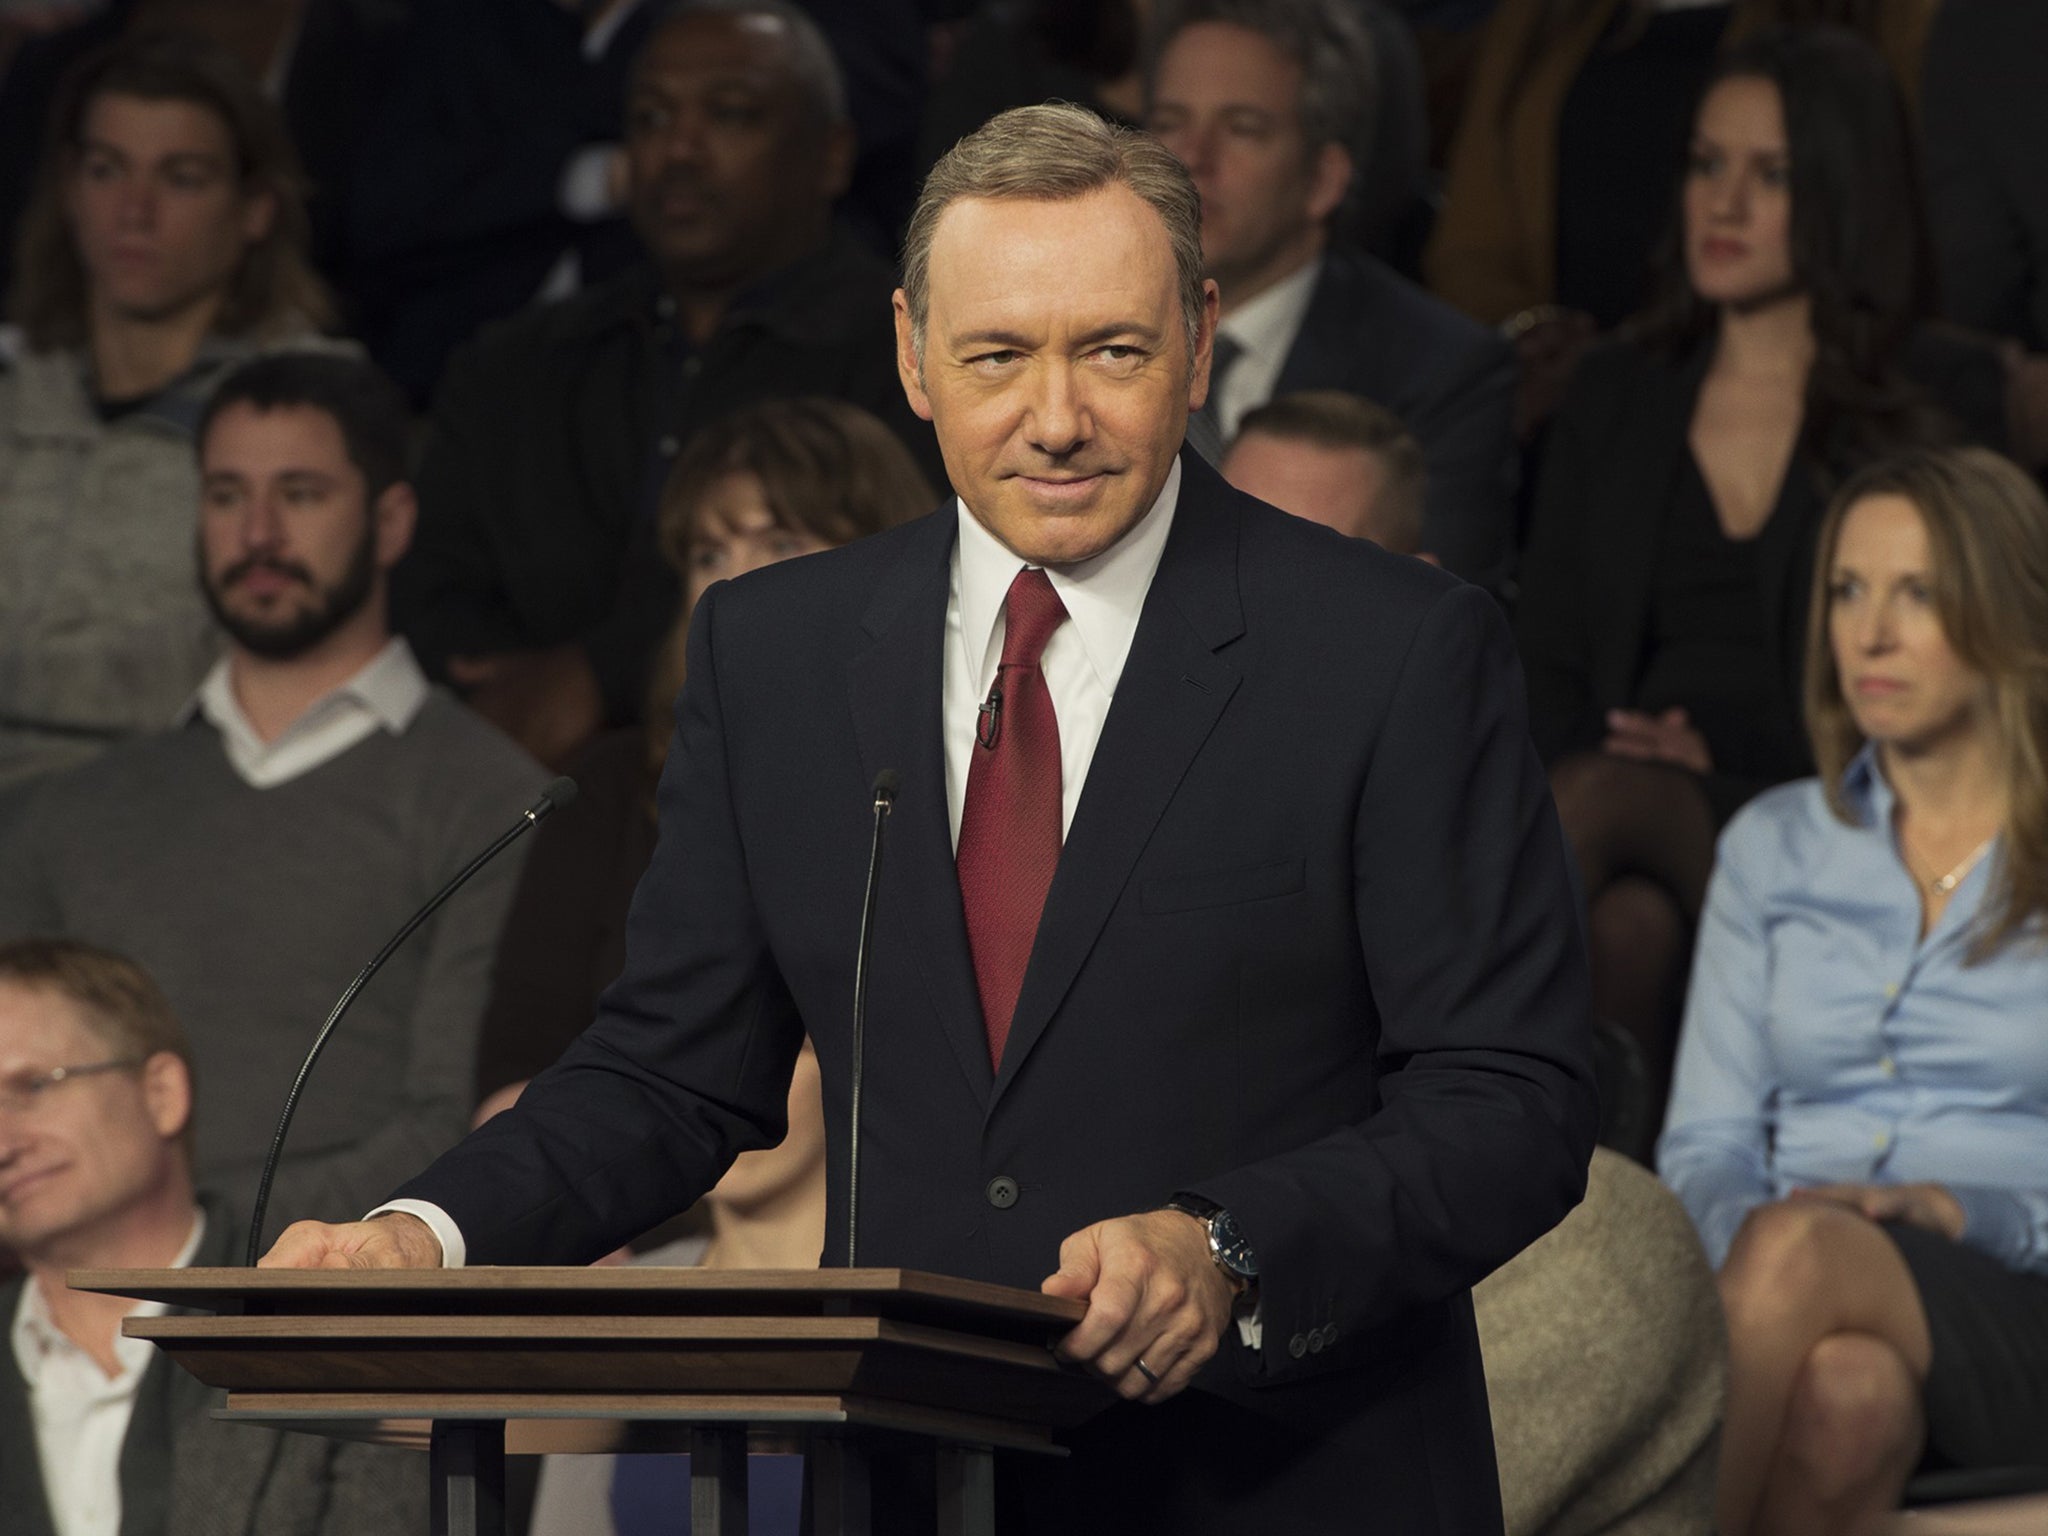 house of cards season 4 review